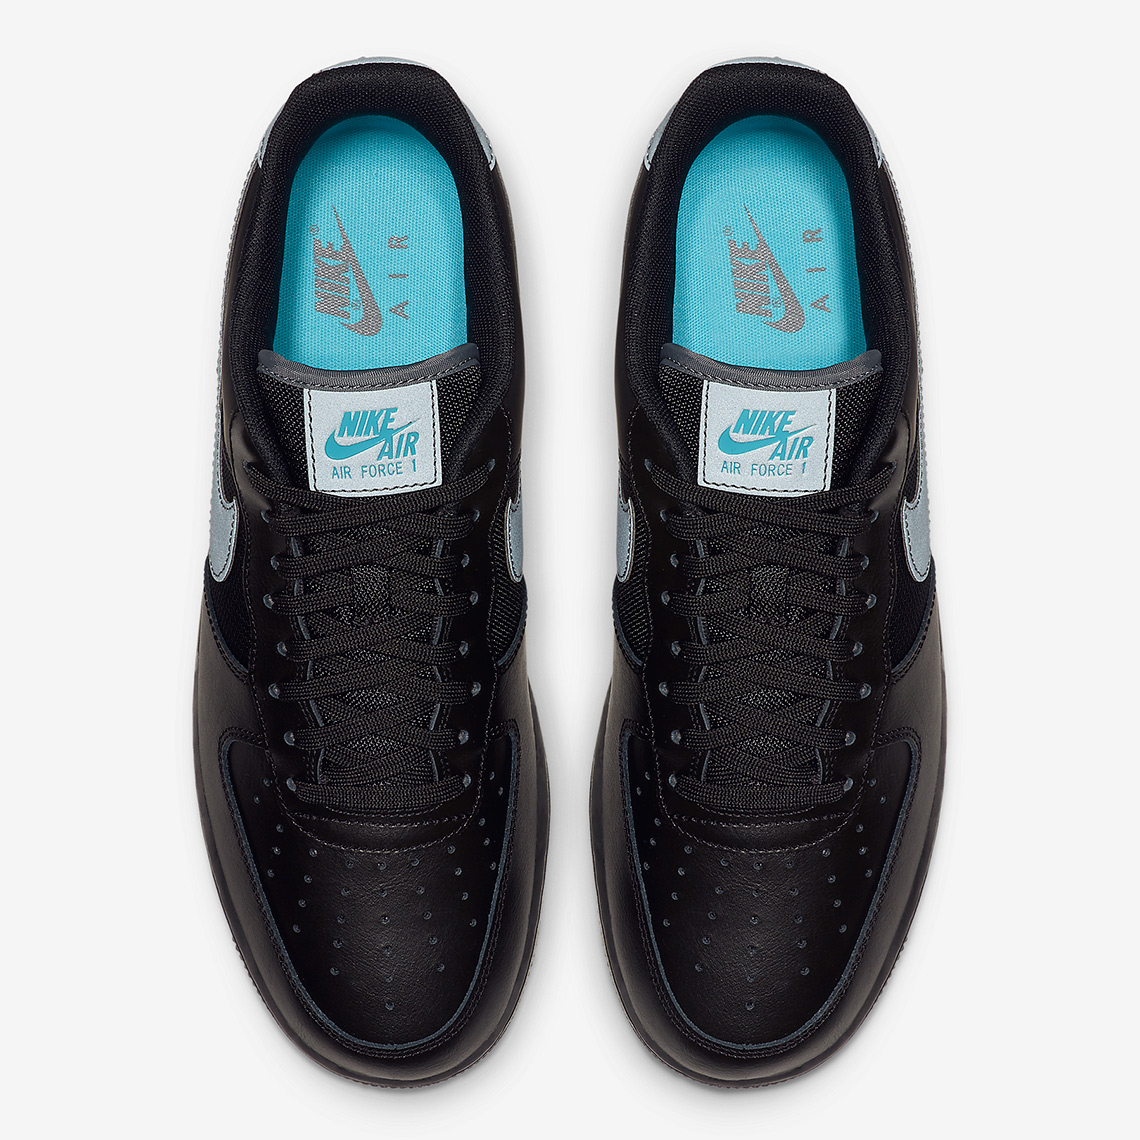 black and baby blue nikes